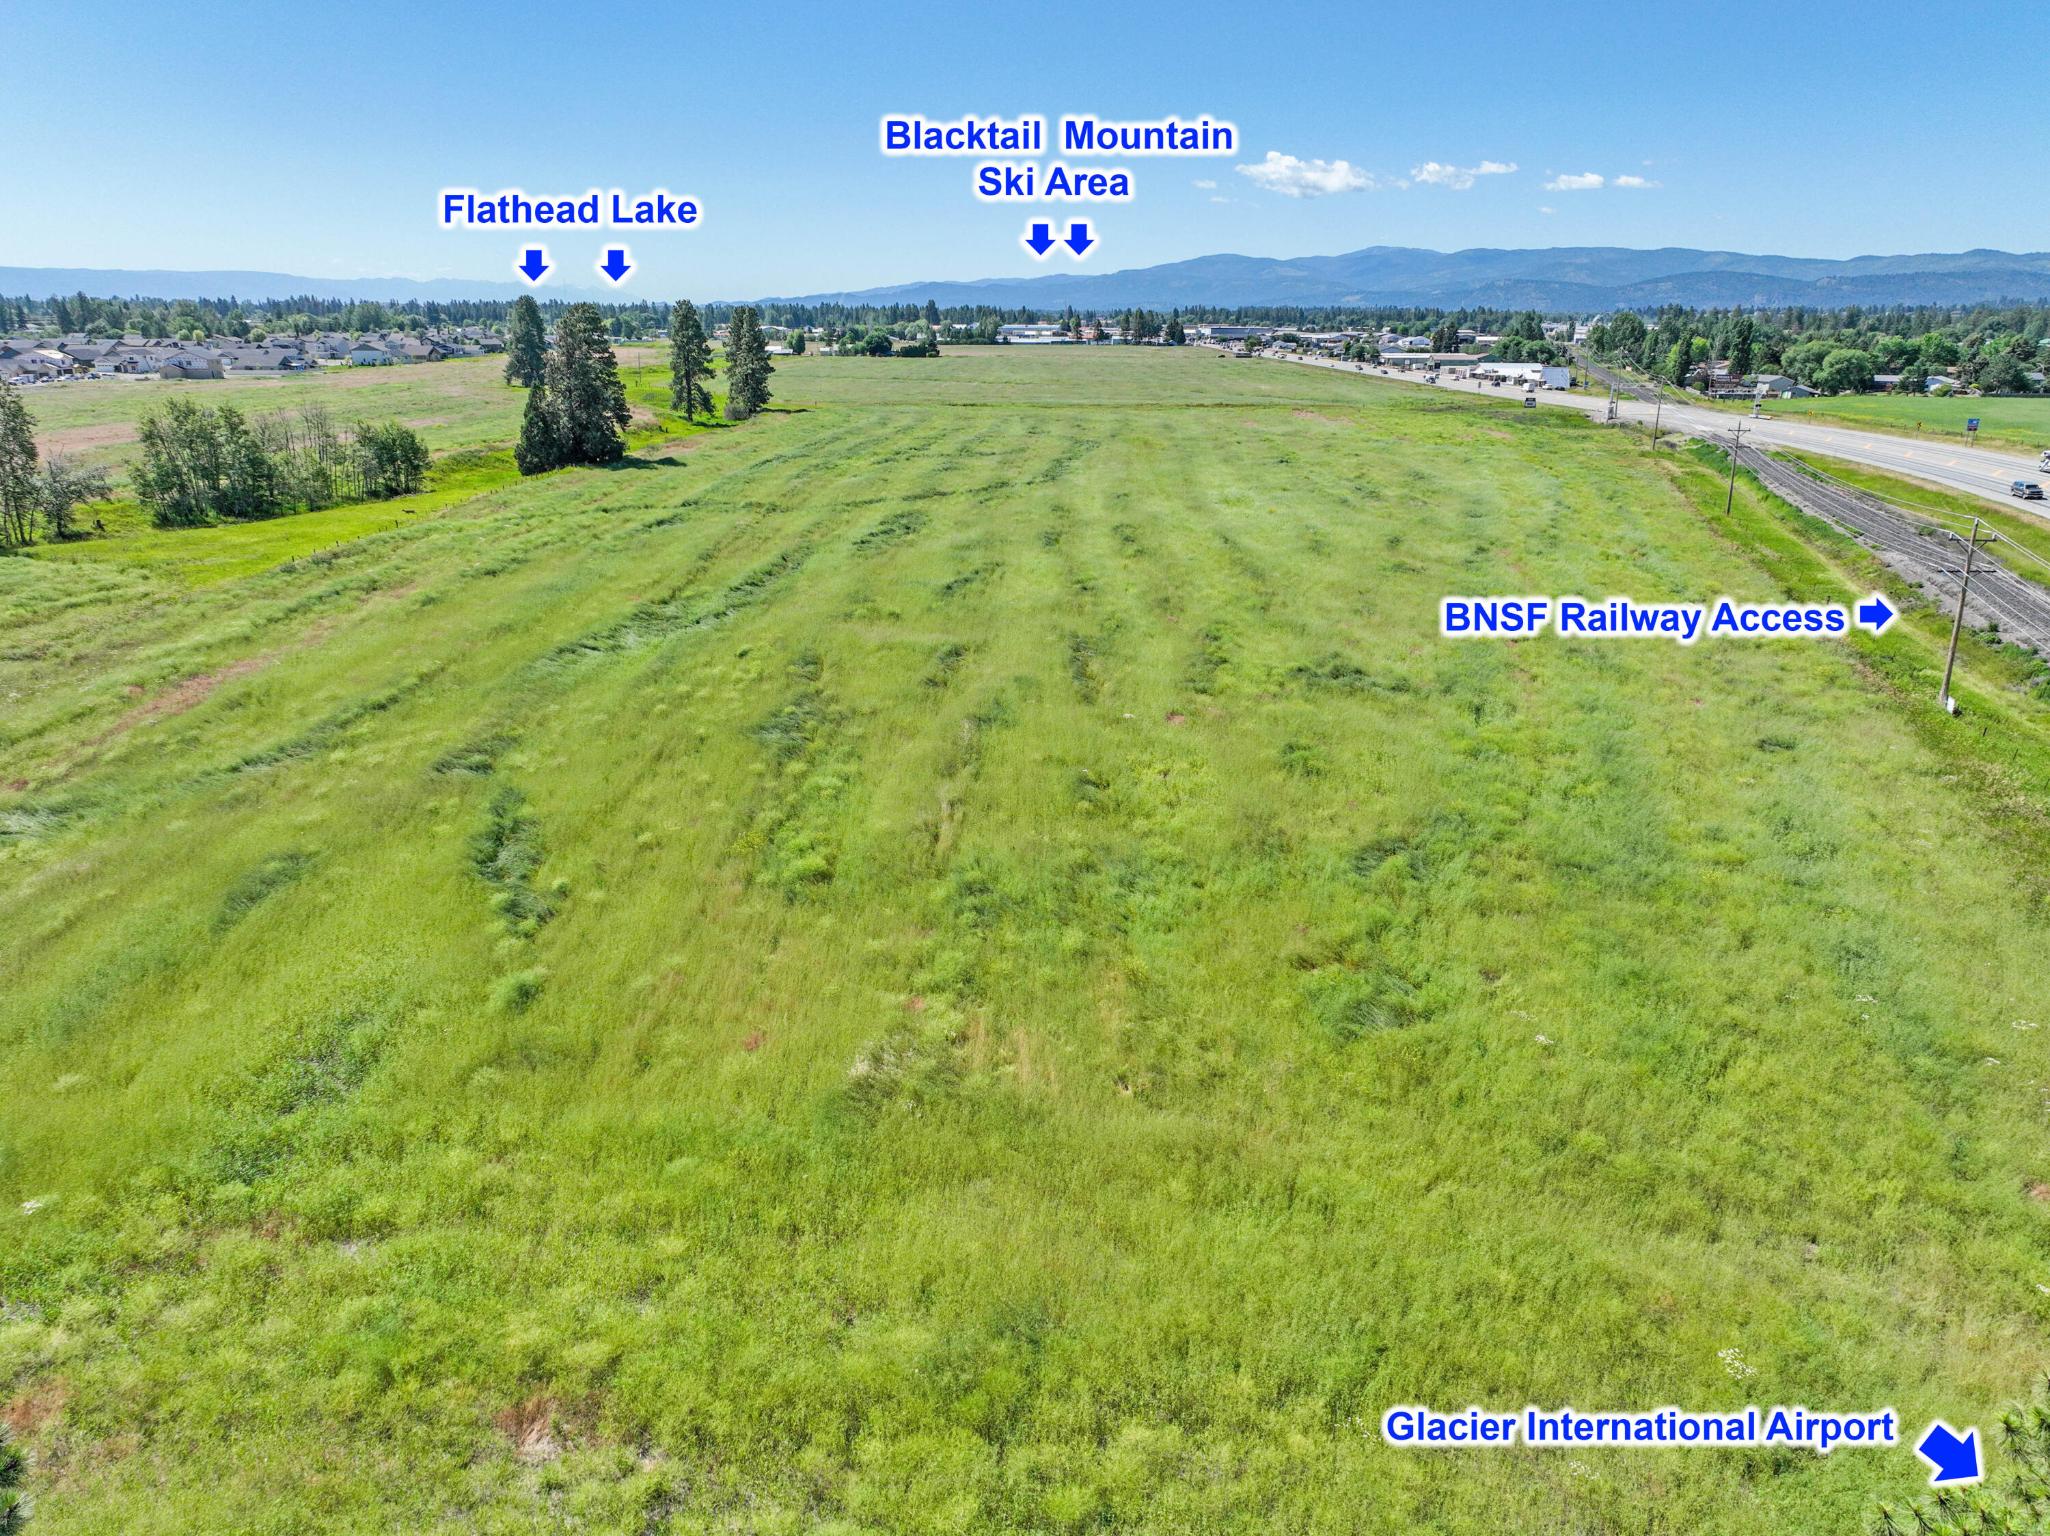 Located in the middle of Flathead Valley, this rare 52+ acres on Highway 2 East has high visibility with average daily traffic count over 17,000. Currently used as agricultural land with established water rights, development possibilities are numerous. This property offers a myriad of business opportunities due to current zoning including hospitality, retail and light industrial to name a few. Option to install a switch yard cooperatively with BNSF Railway approval, for easy transportation of materials or products. It is also located minutes away from local landmarks: Glacier International Airport, Glacier National Park, Flathead Lake, Whitefish Mountain Resort and so much more. Call Mark Kuhl (406) 407-7509 or your Real Estate Professional